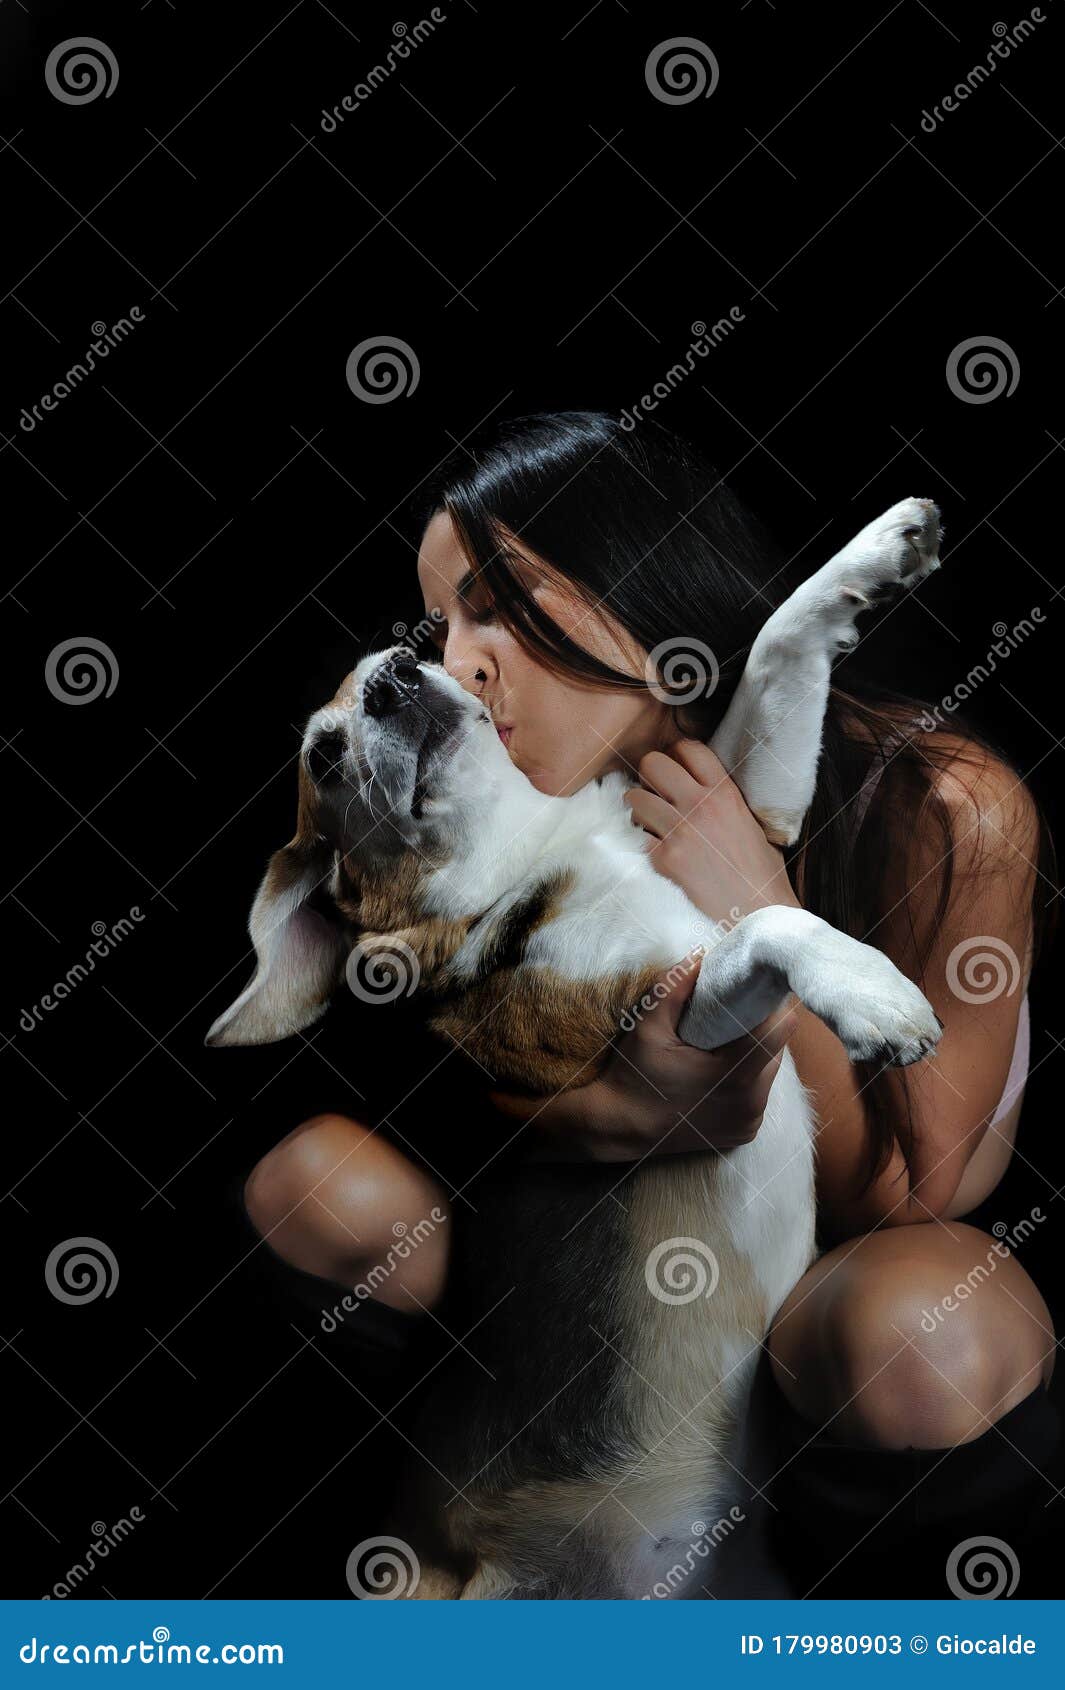 Hot Women With Animals cuckold sessions